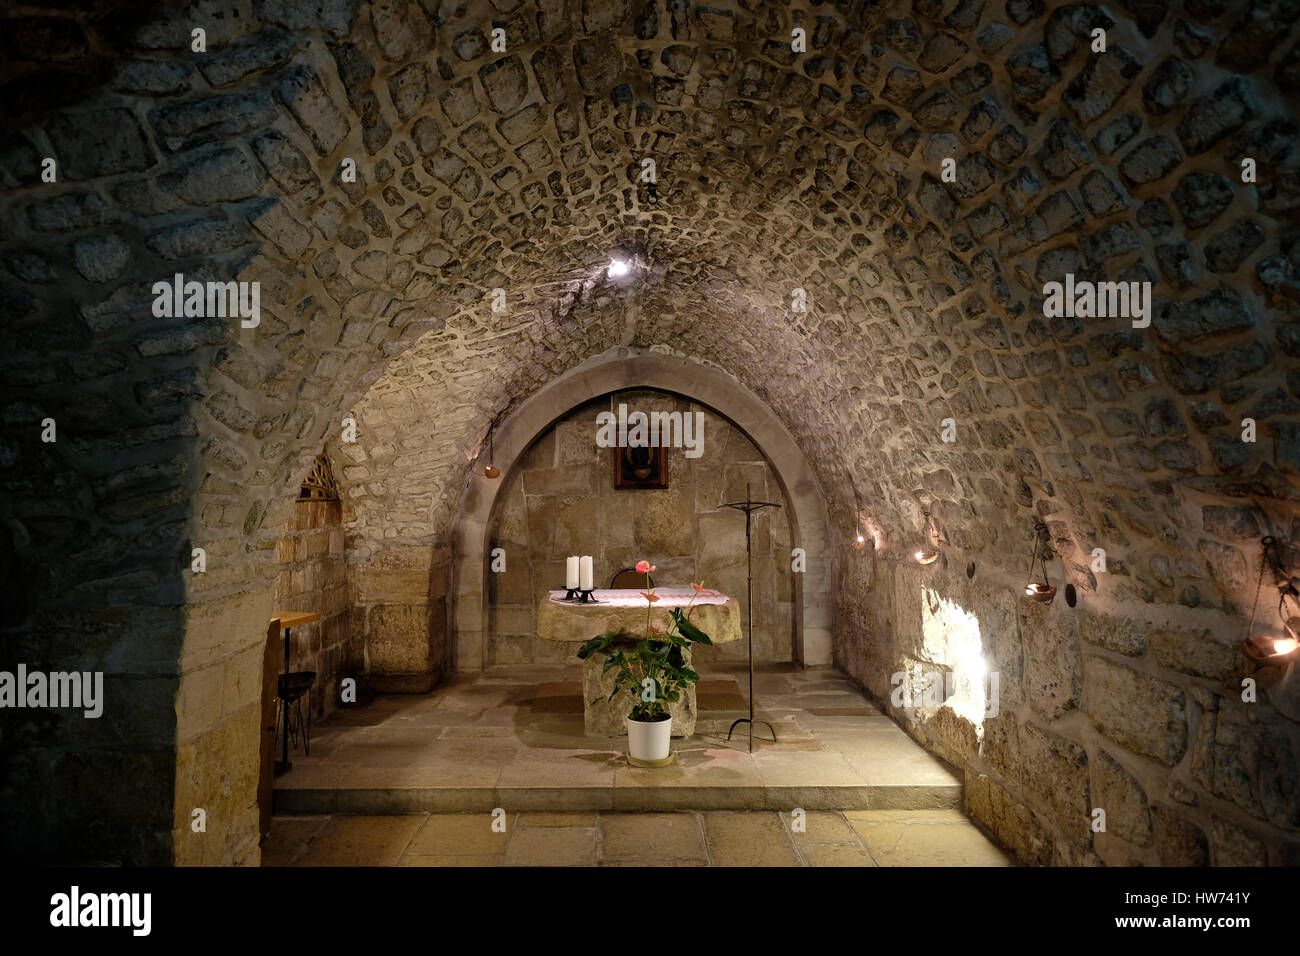 Interior of the crypt of st veronica church at the 6th station of the cross  in Via Dolorosa street in the old city of Jerusalem Israel Stock Photo -  Alamy